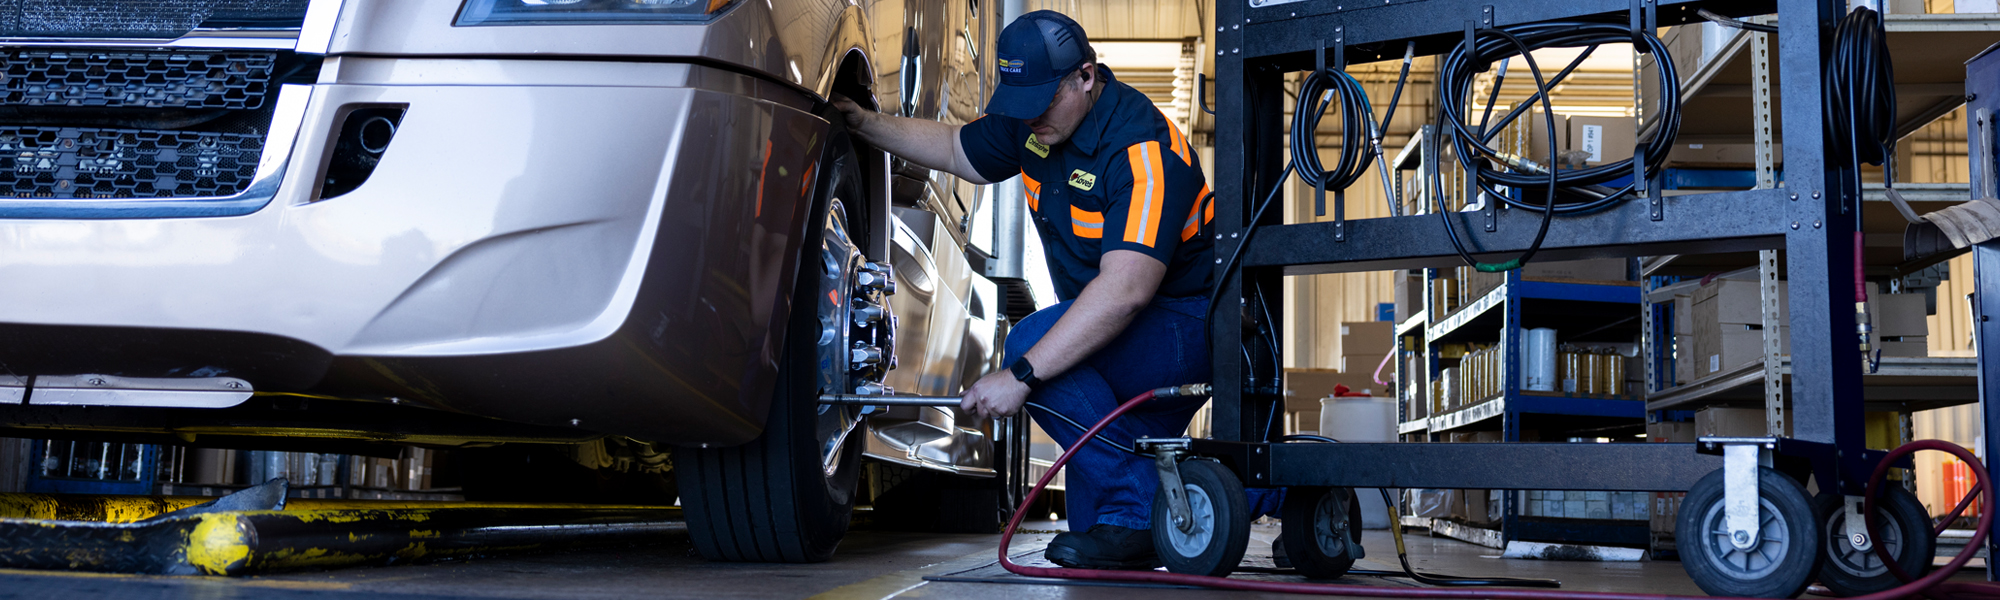 A truck care technician performing TirePass service on a truck in the service center